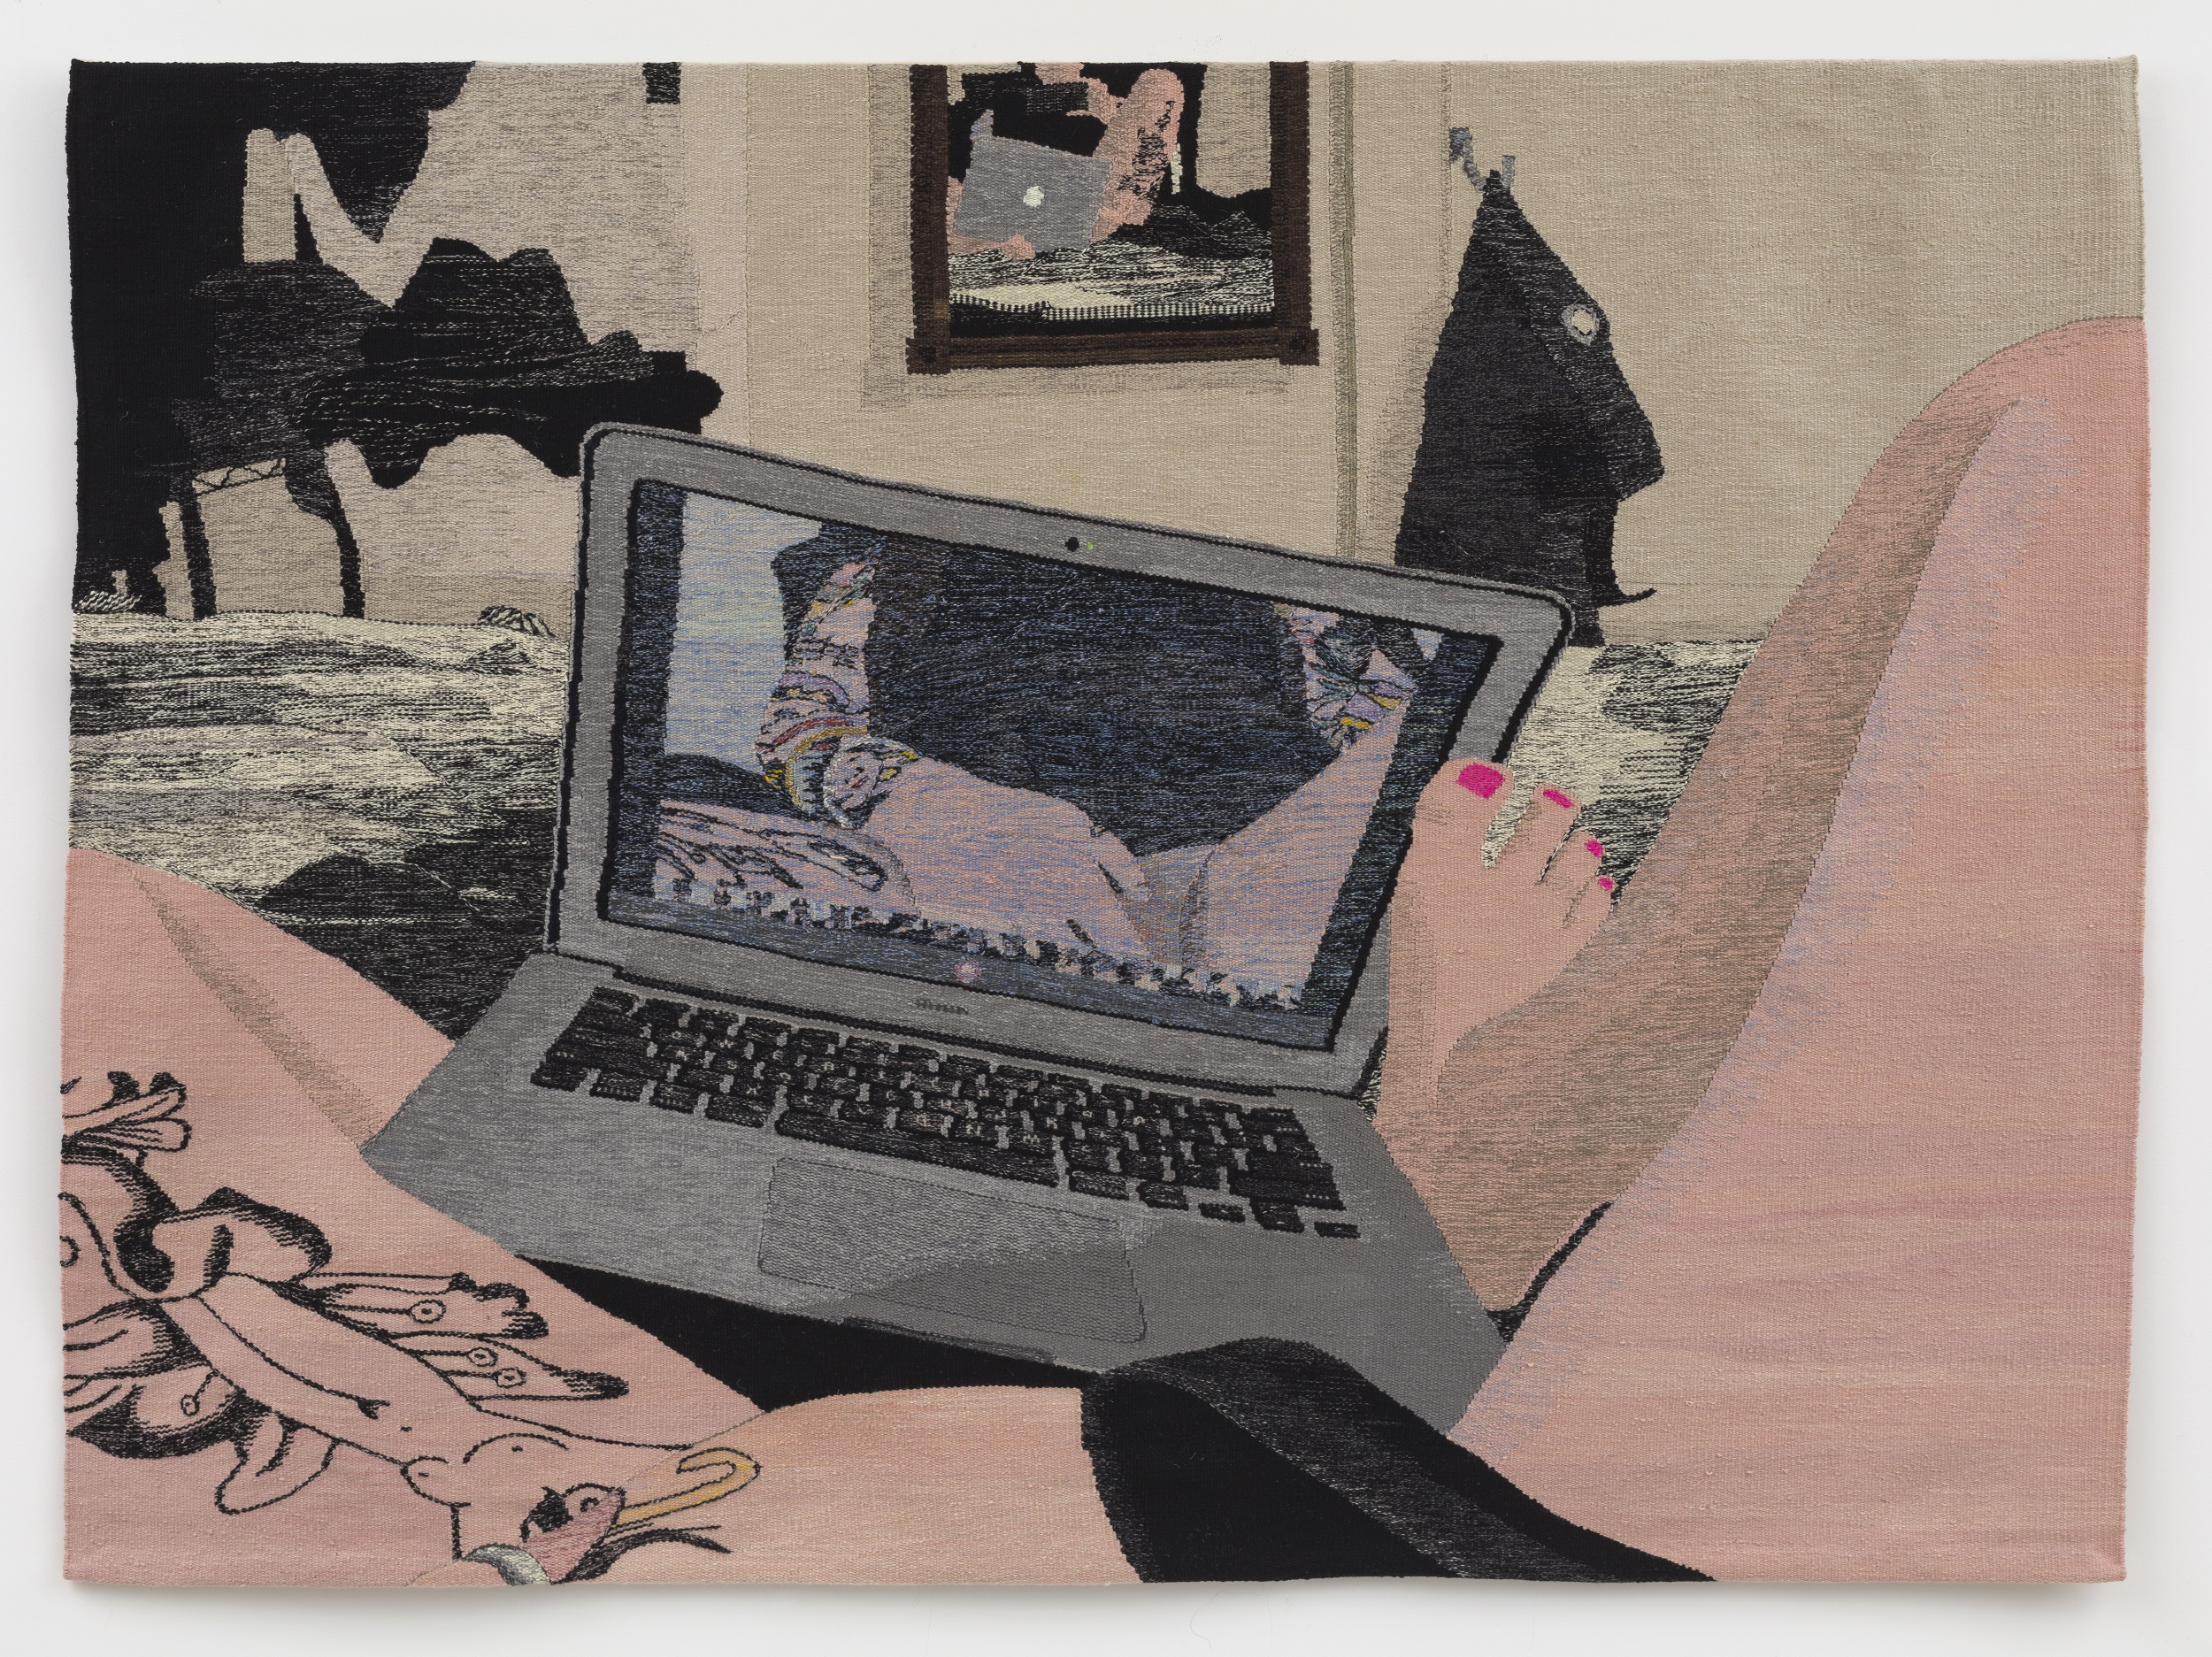 Woven tapestry of an open laptop with its front-facing camera on, showing a woman's spread-open legs with her hand between them. The woman's legs and some portions of the surrounding room are visible on the perimeter.